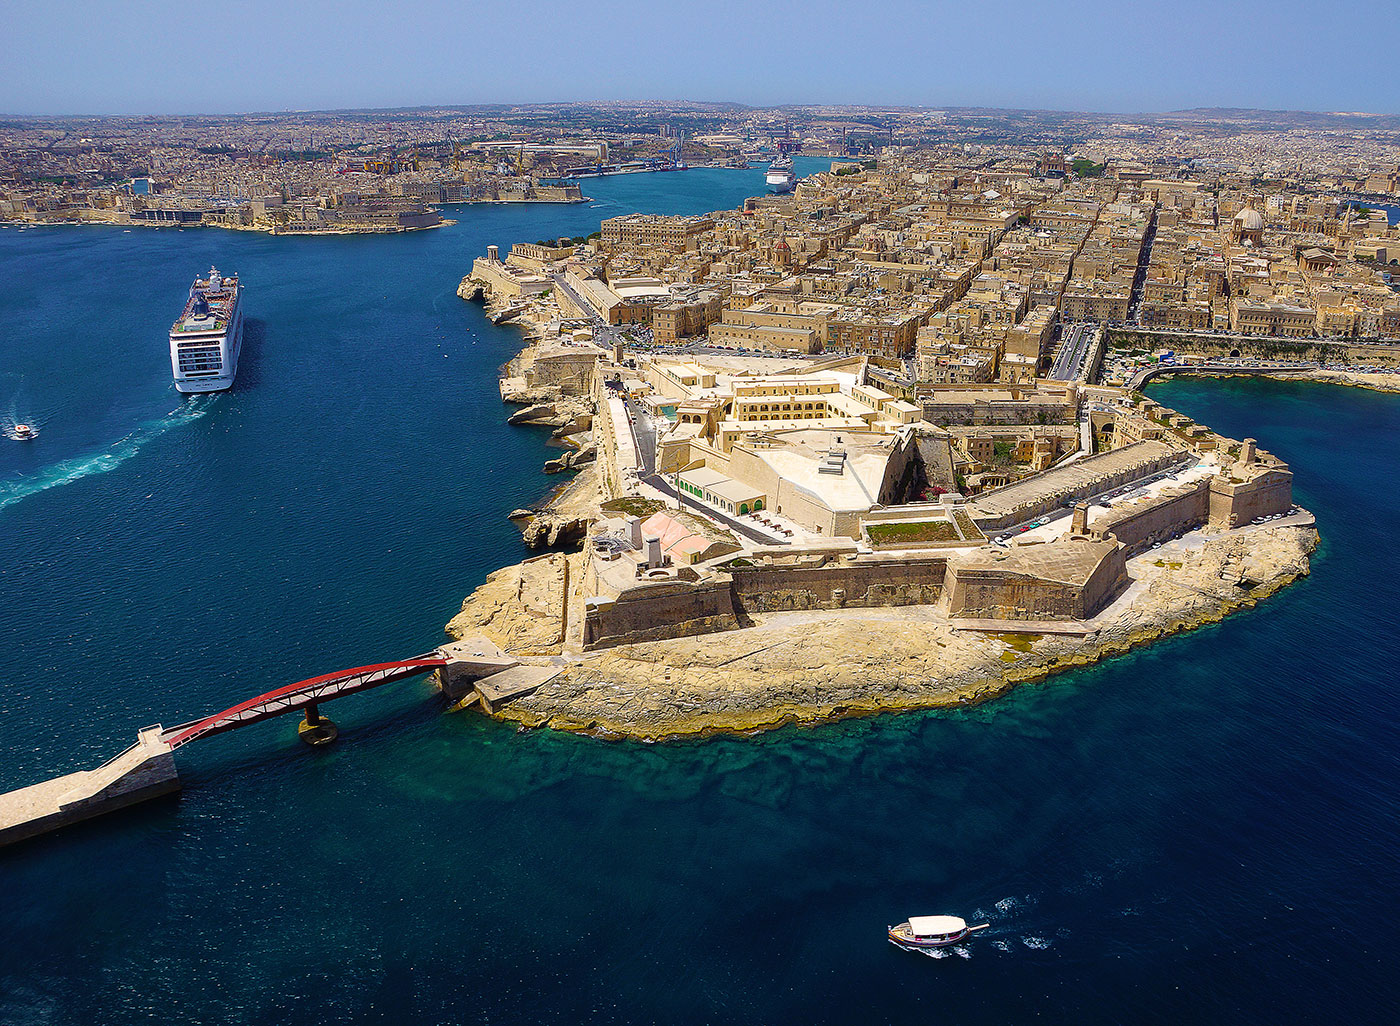 The Malta Cruise Network Forum launched